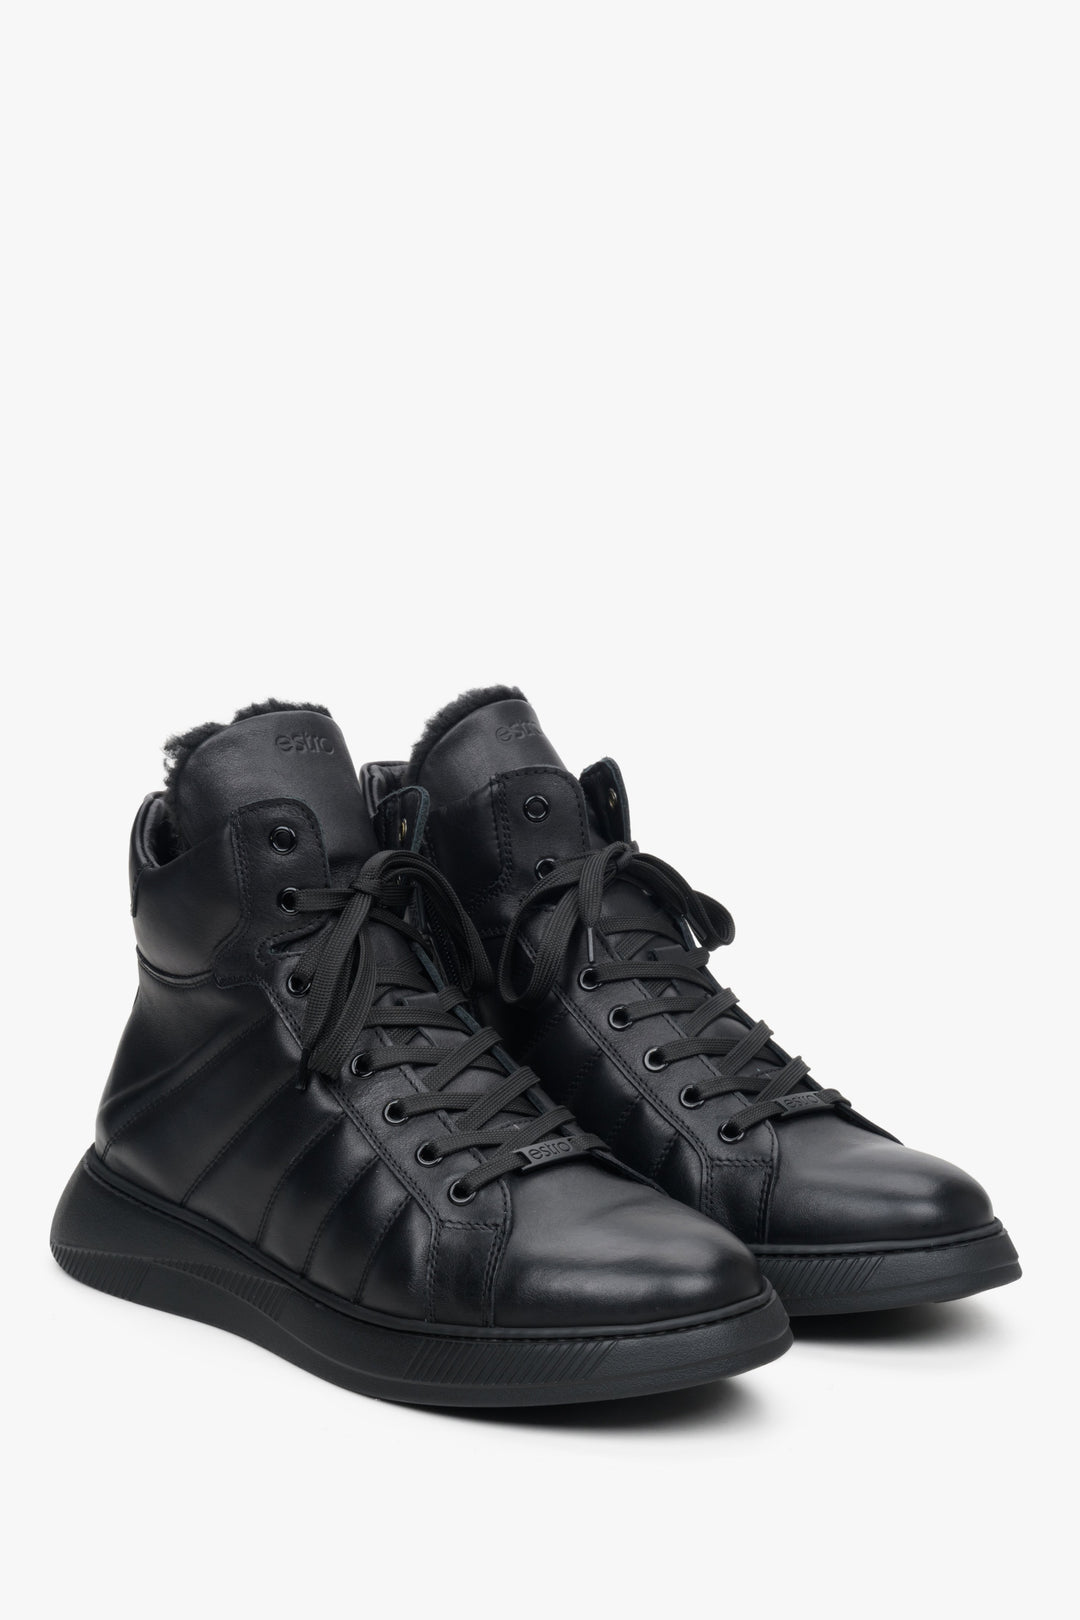 Men's black high-top winter sneakers made of genuine leather by Estro.